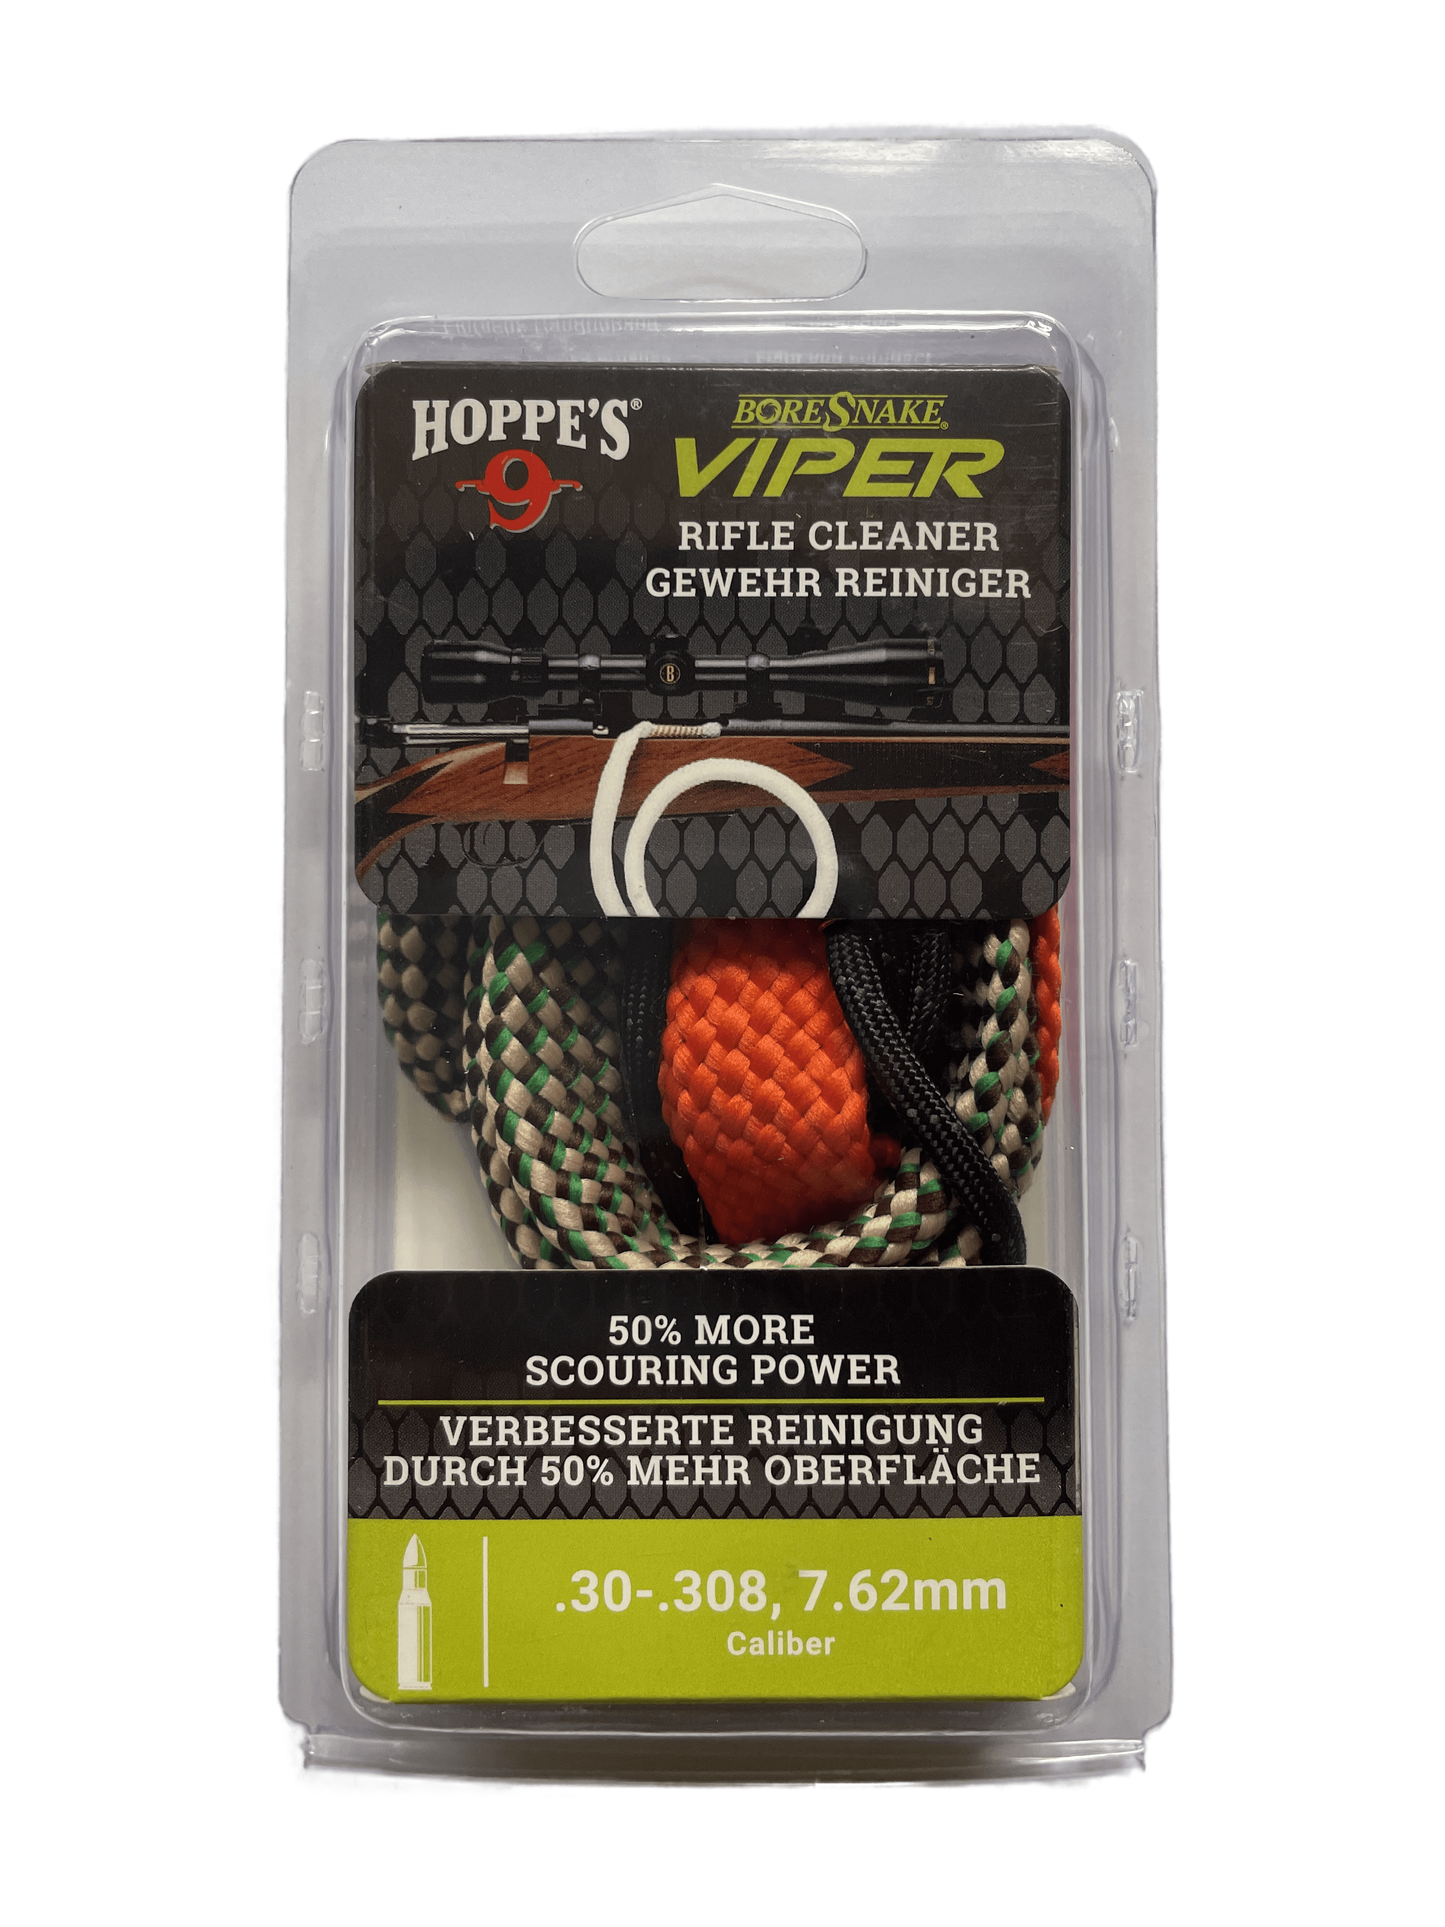 Hoppe's BoreSnake is the original barrel cleaning cord